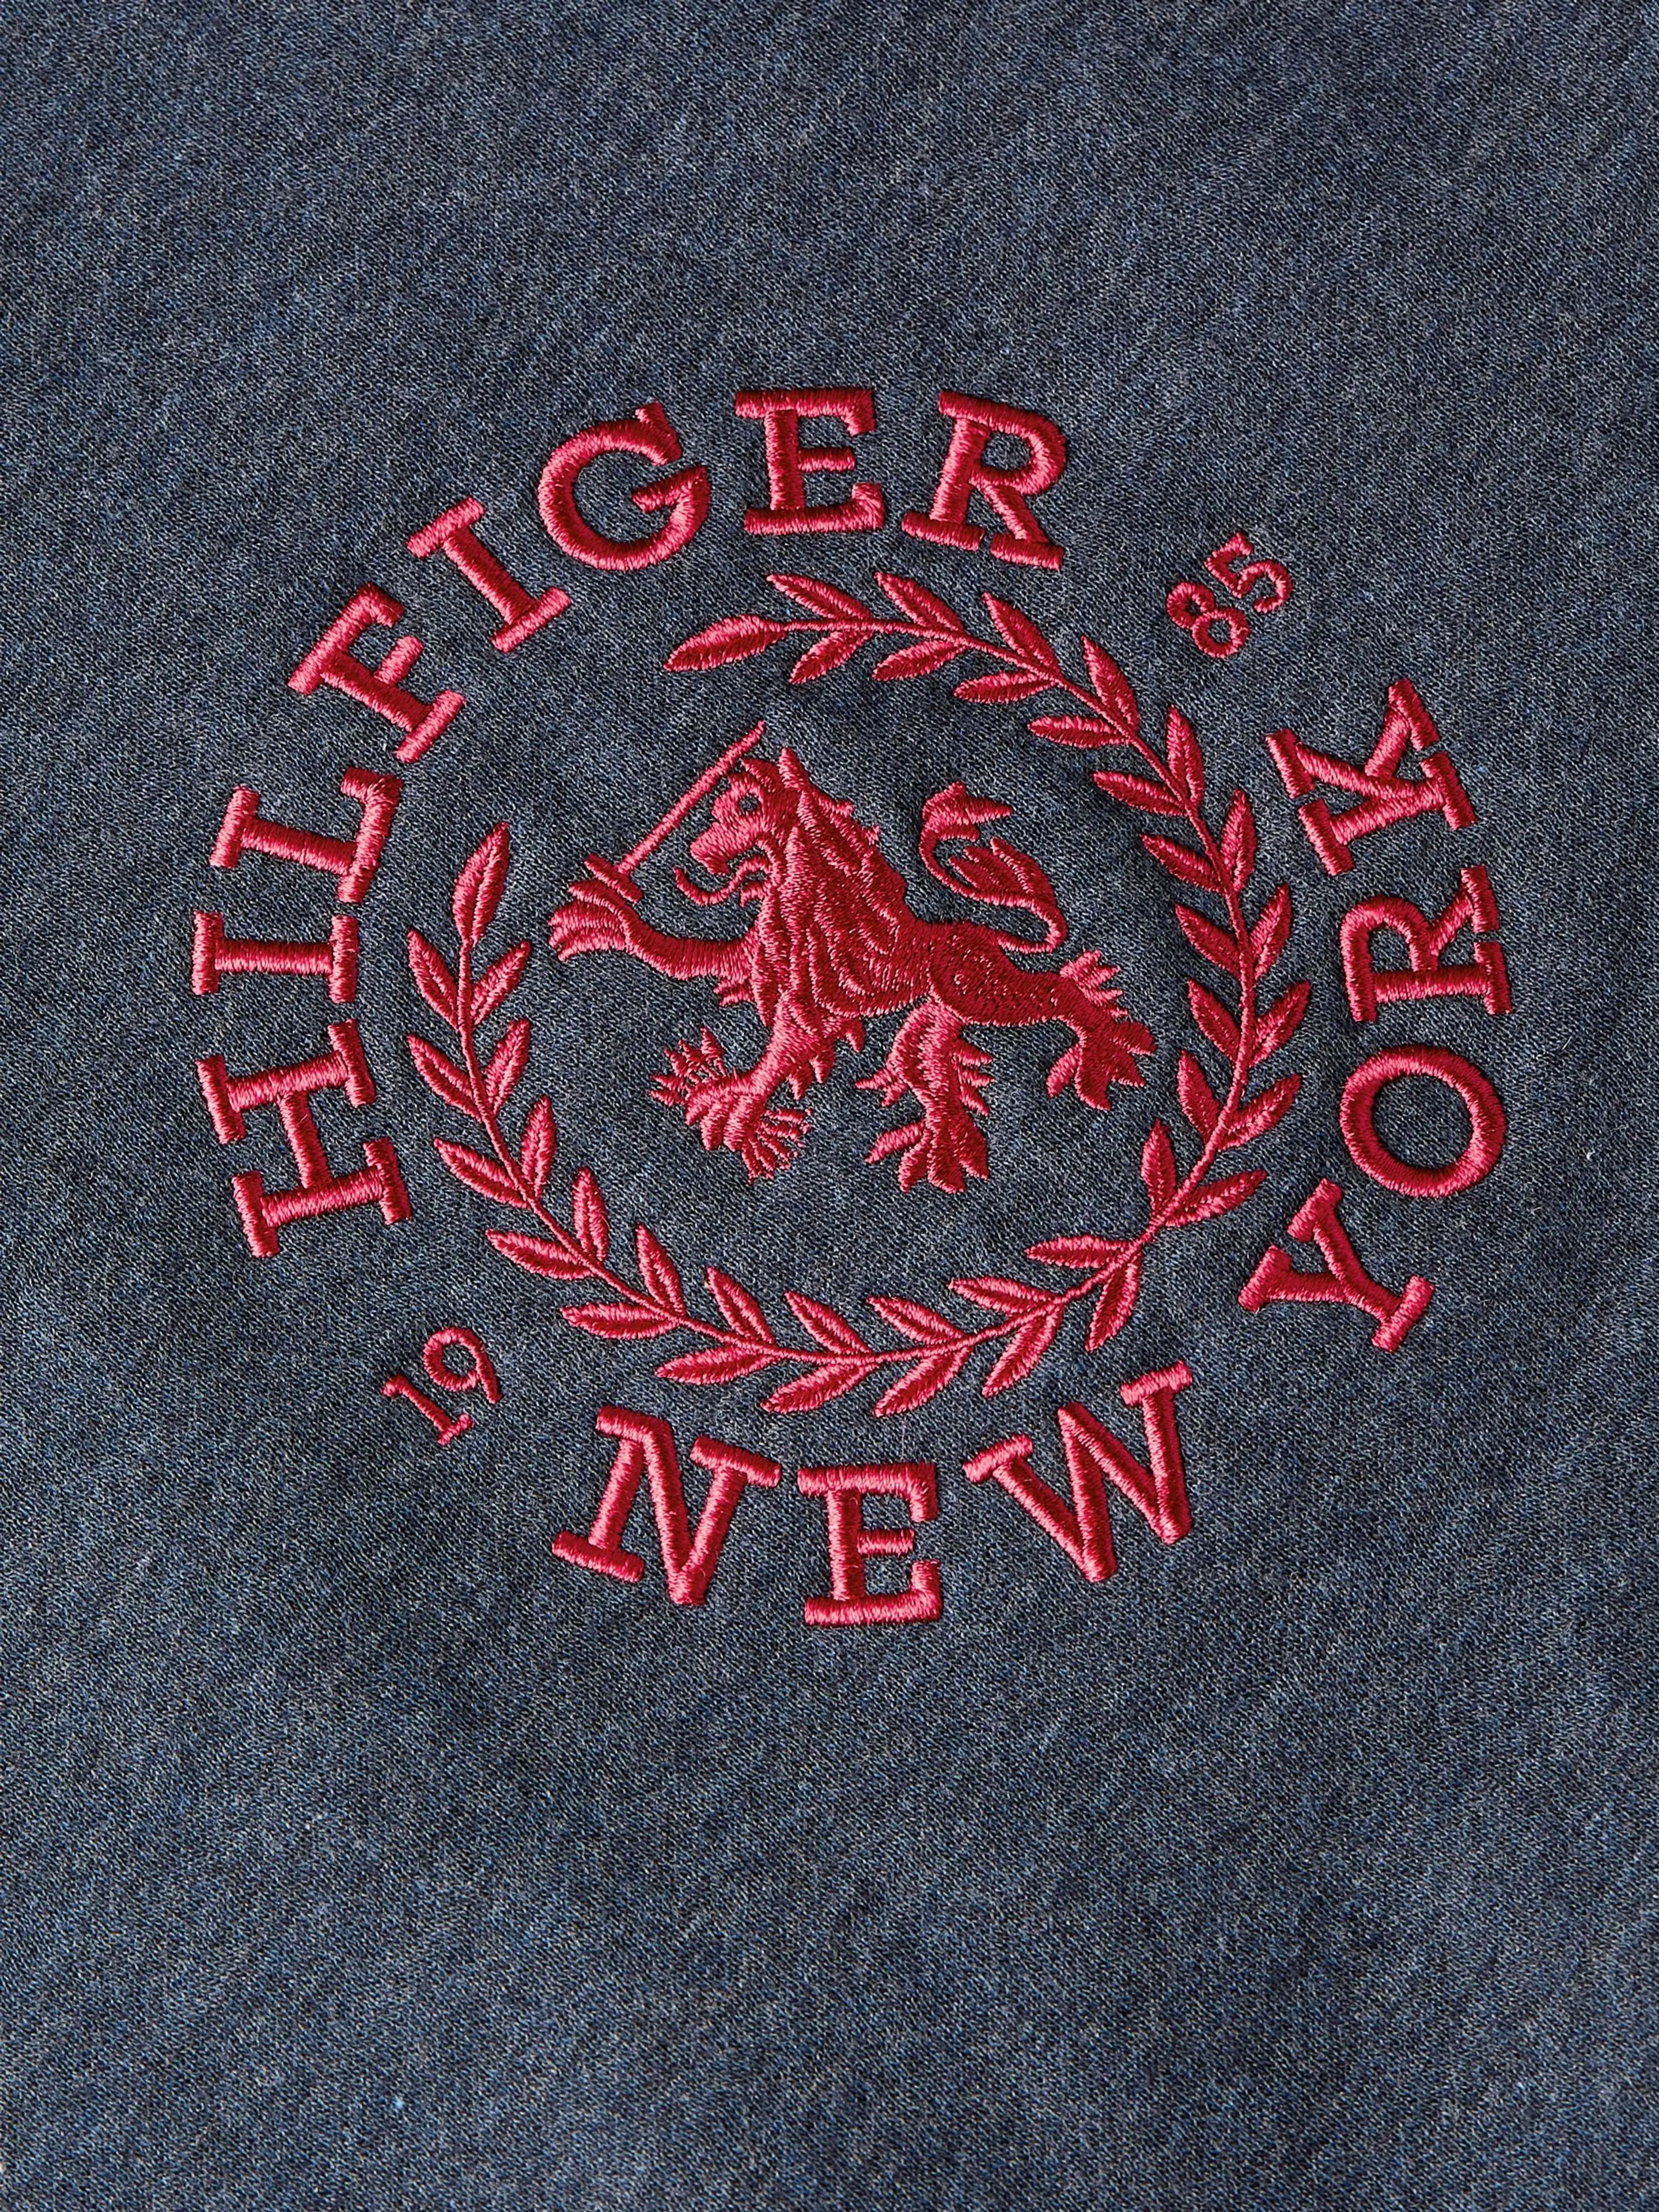 Tommy Hilfiger Small crest college